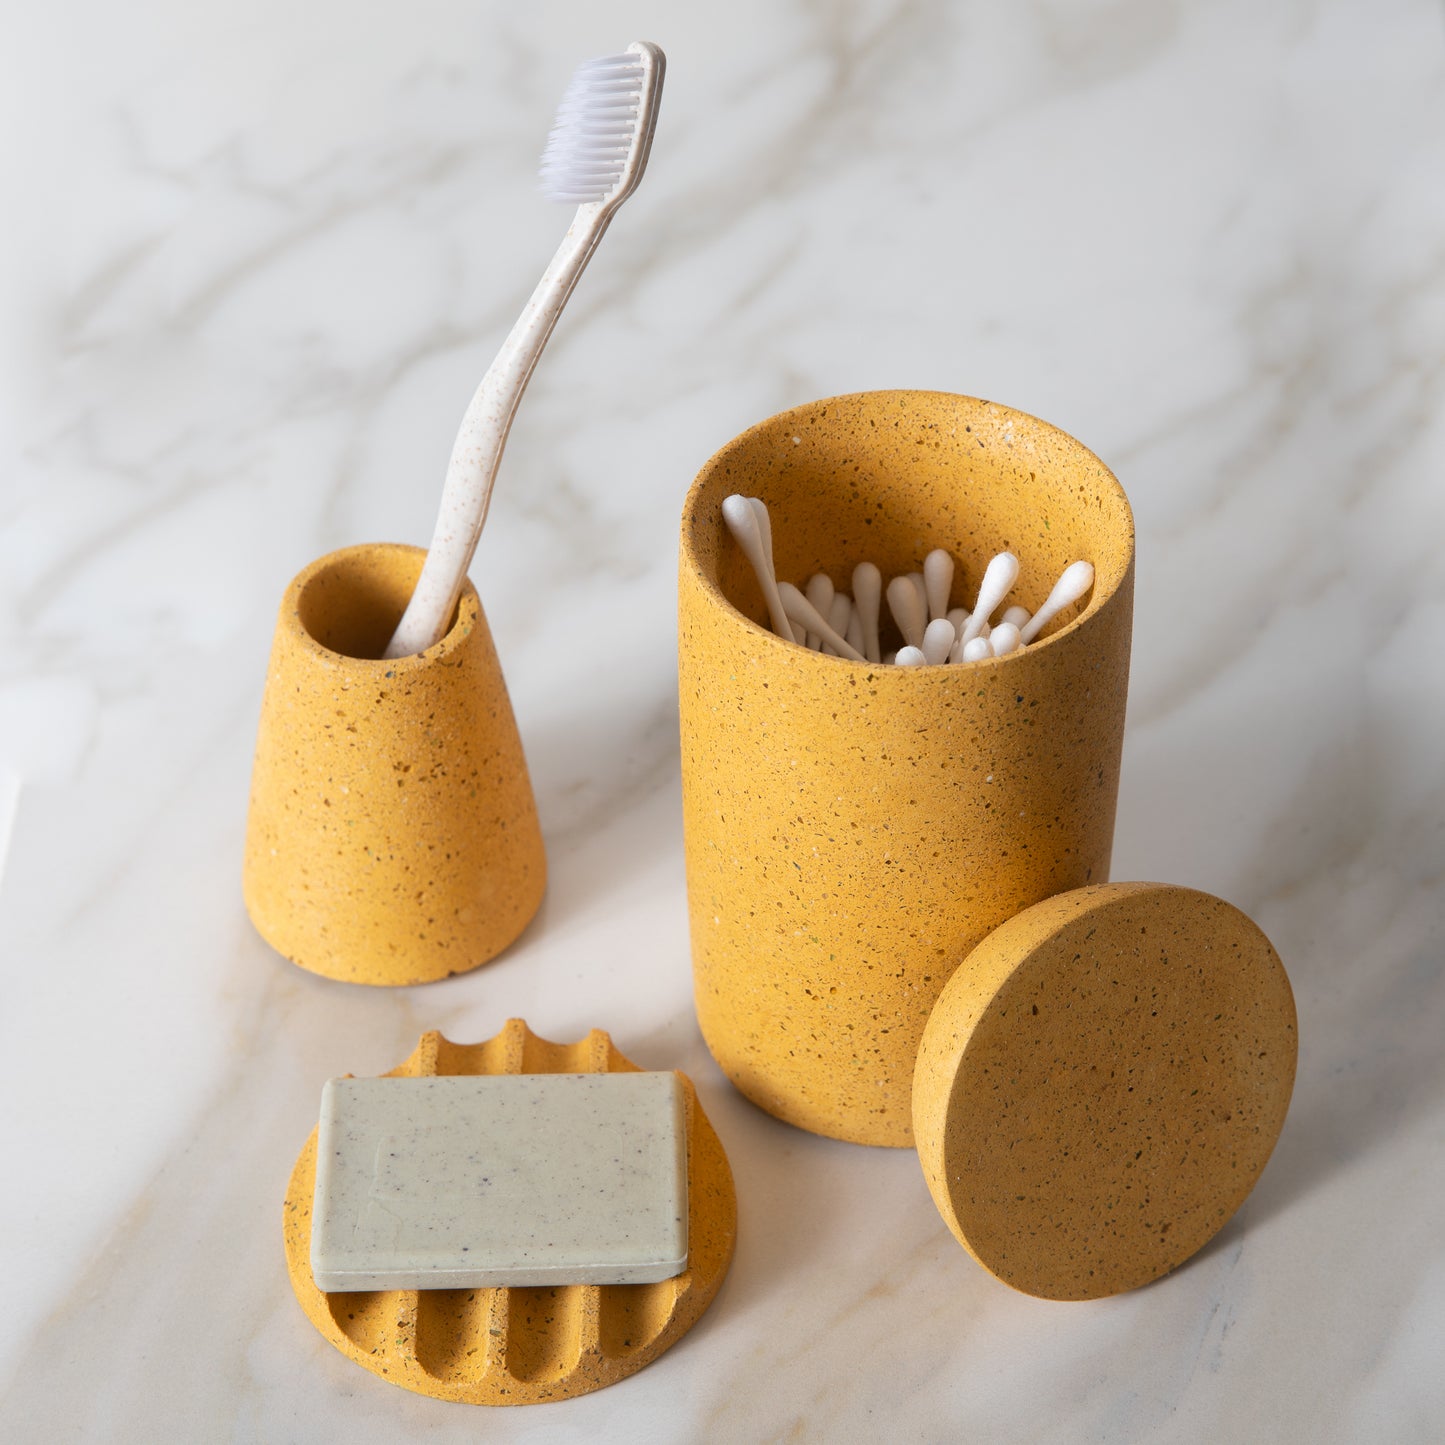 Mini Soap Dish in Marigold Terrazzo, style with a toothbrush holder & cotton swab holder.